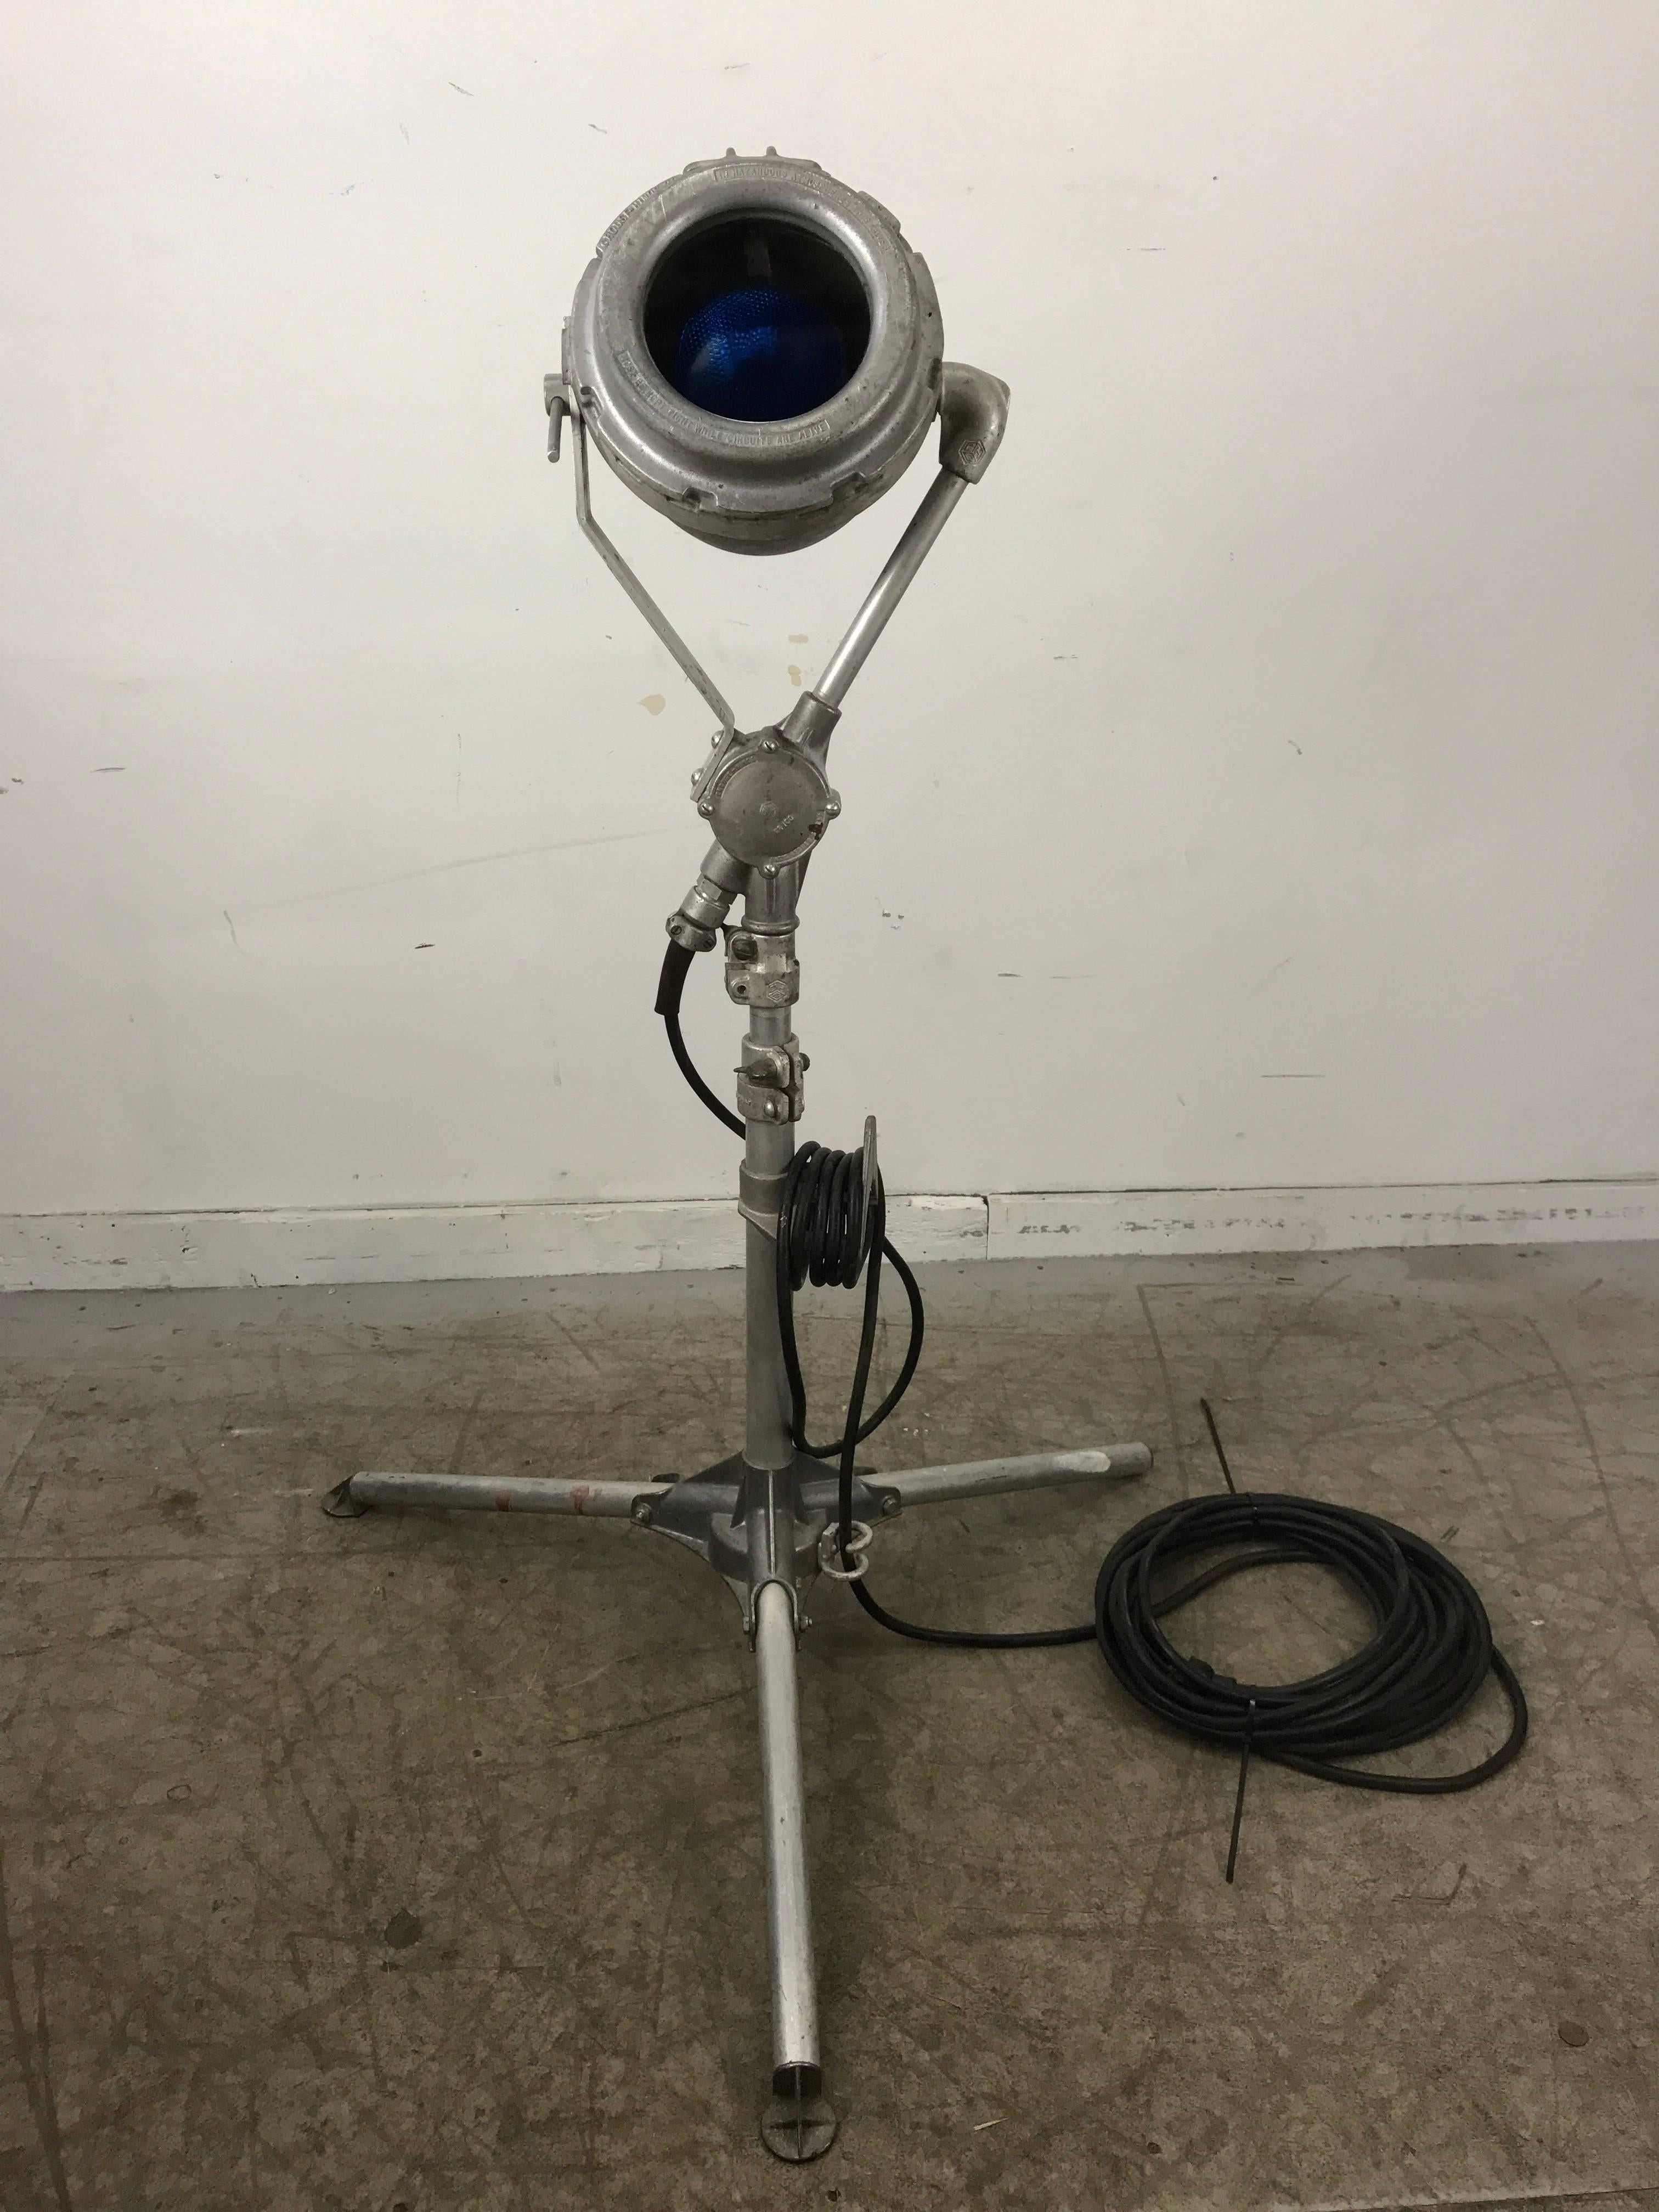 Mid-20th Century Industrial Floor Lamp, Nautical, Search Light Made by Crouse-Hinds